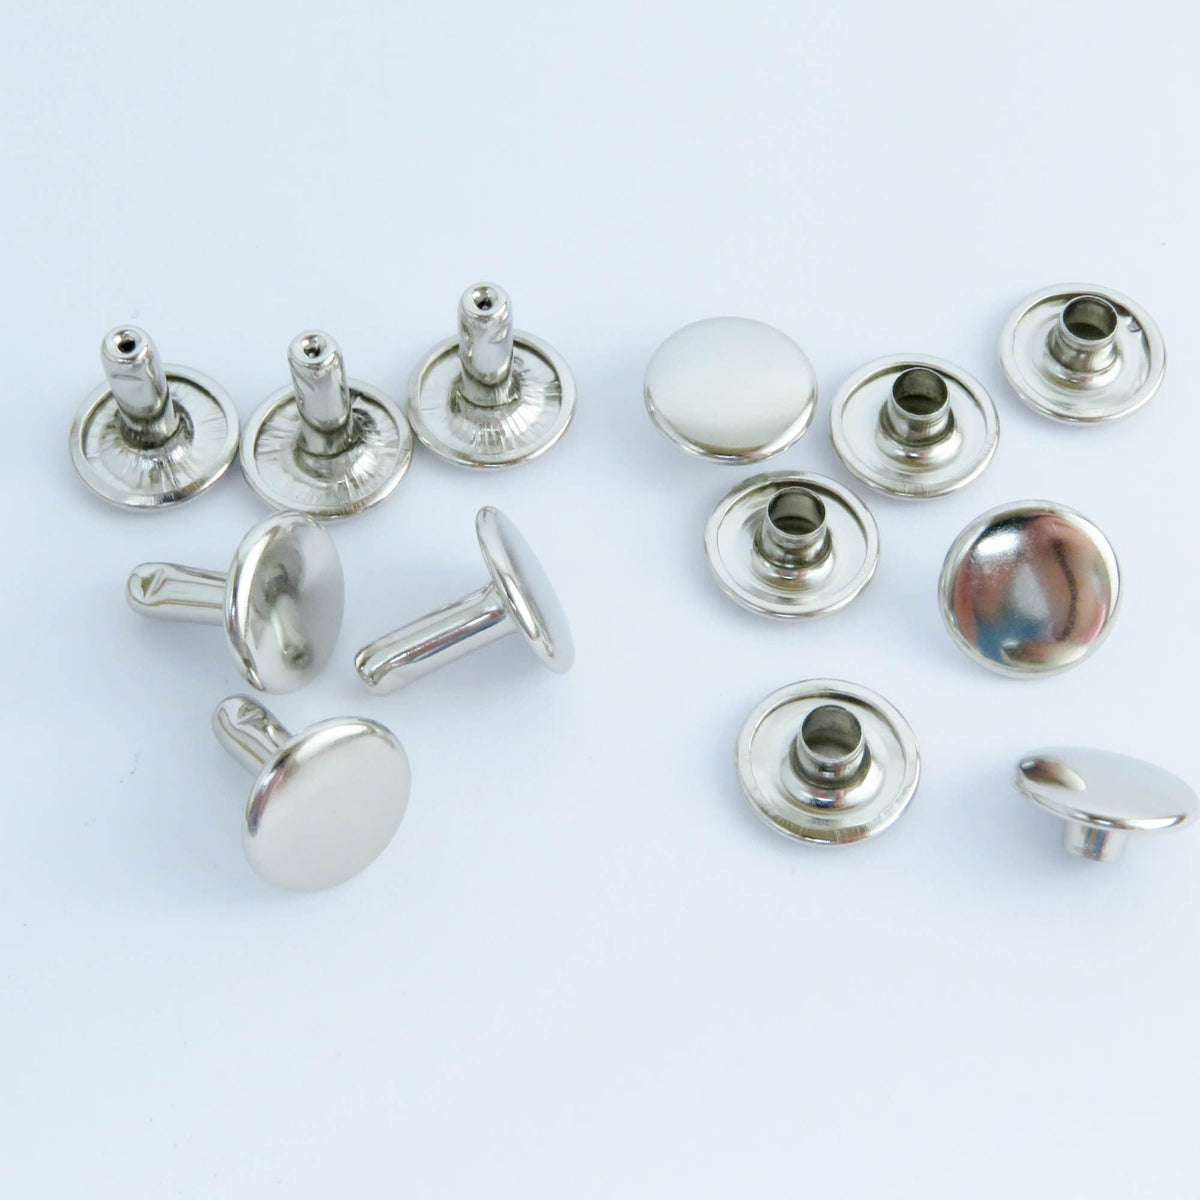 10 MM DOUBLE CAP RIVETS FOR LEATHER AND CRAFTS ATIQUE BRASS/NICKEL/BRASS/BLACK NICKEL AVAILABLE